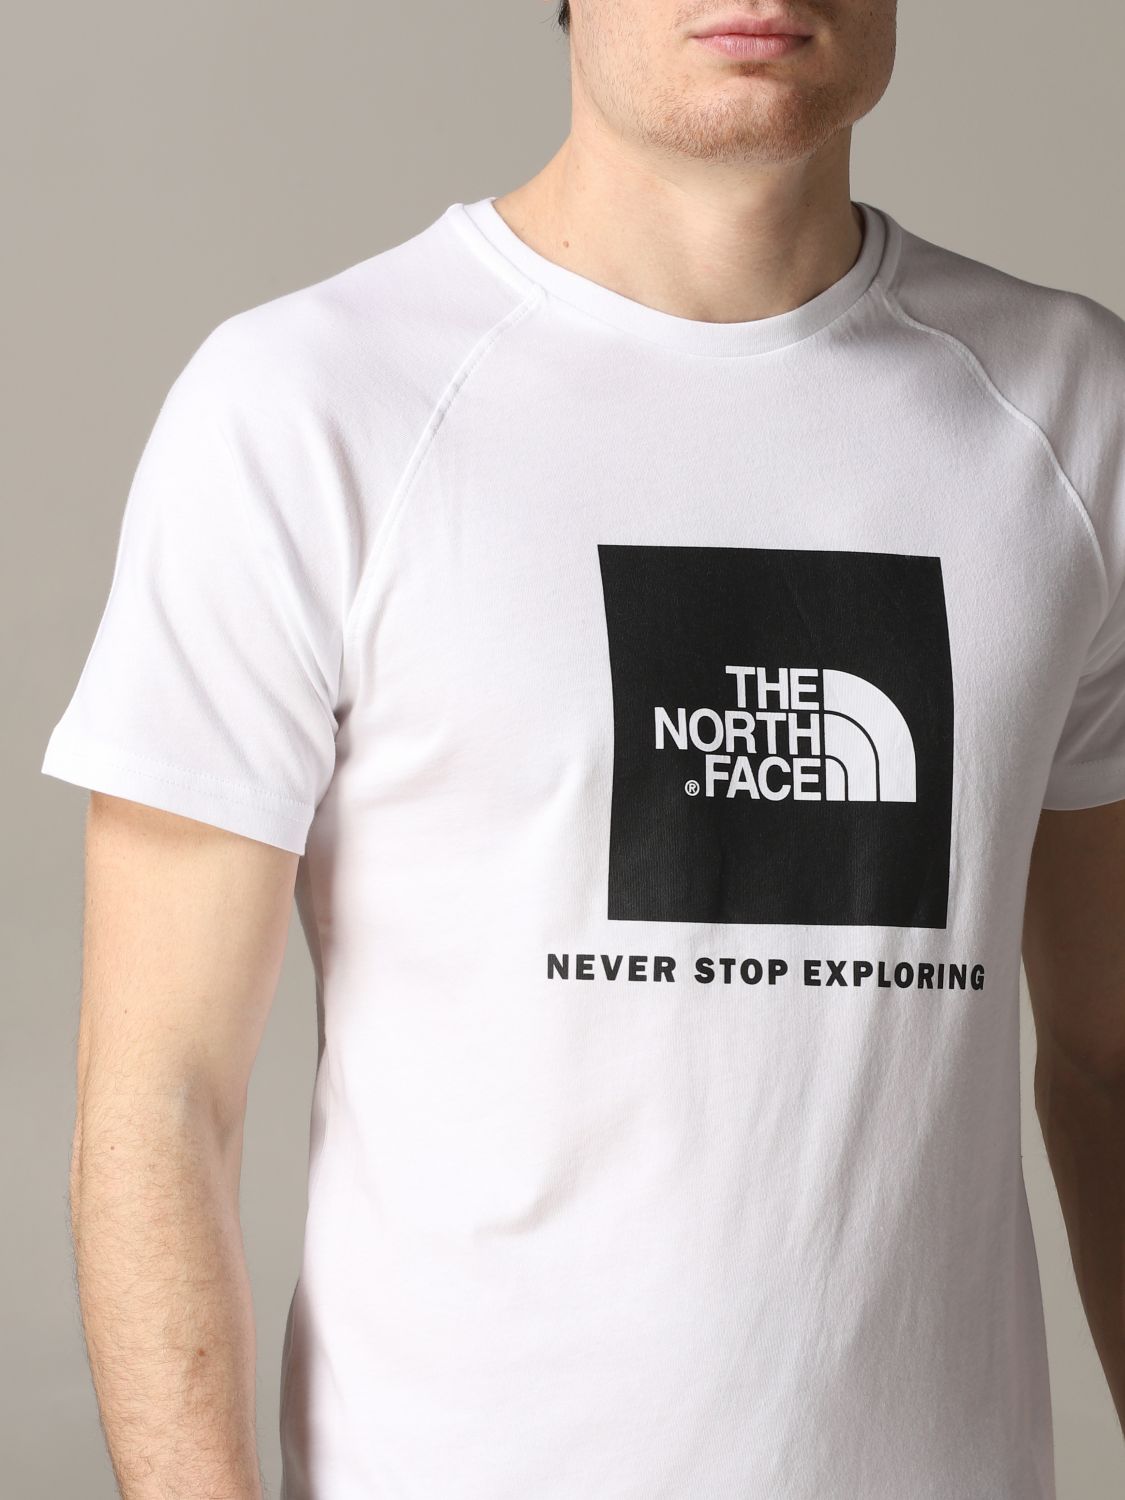 the north face t shirt never stop exploring